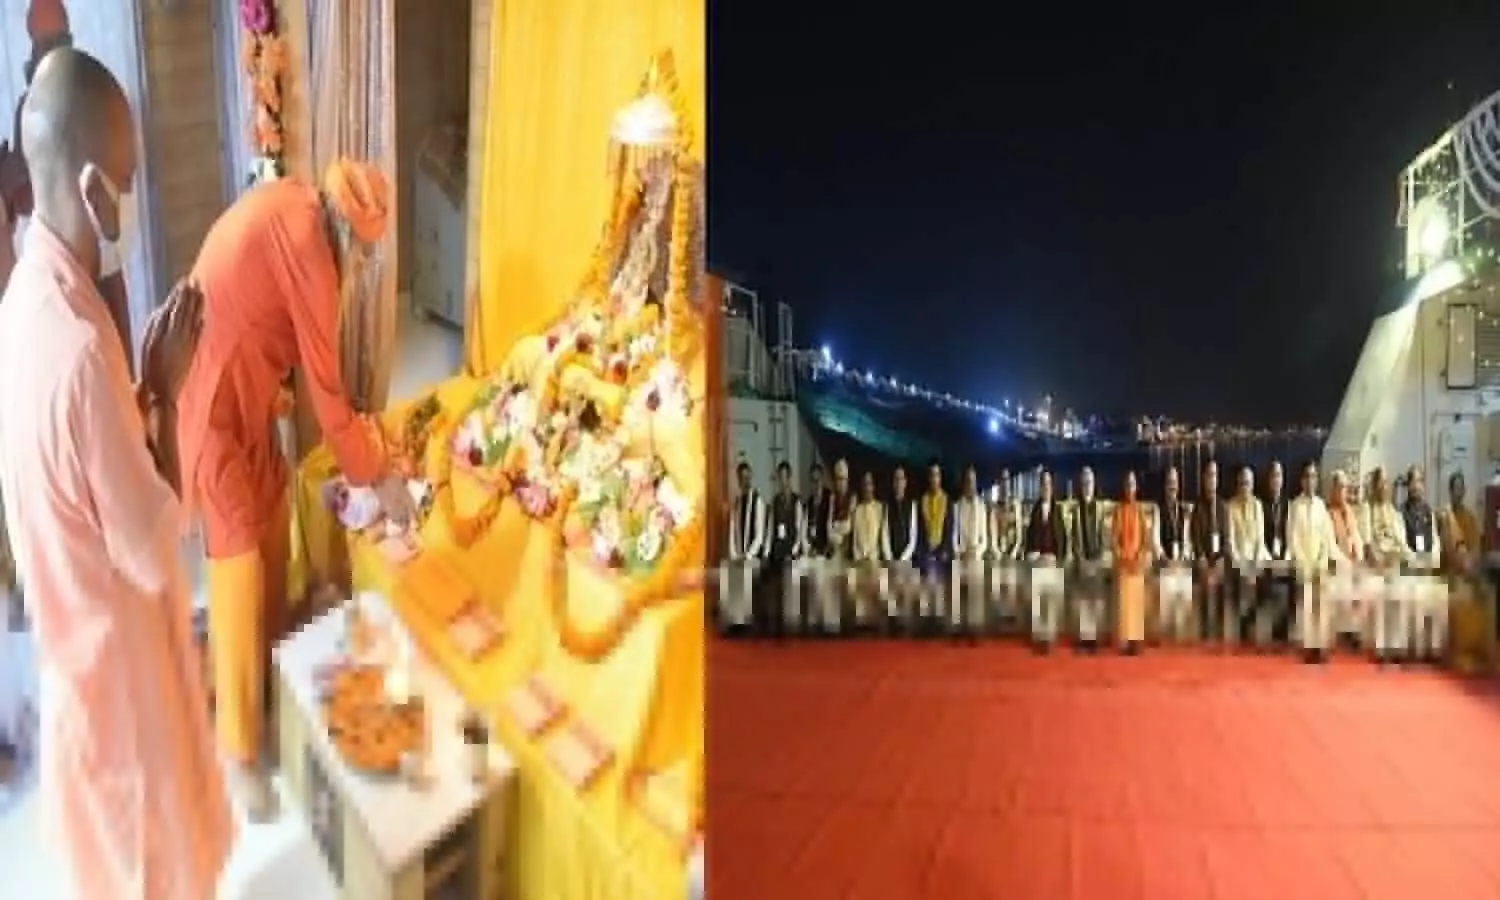 Ayodhya News: For the first time in the history of Ayodhya, 12 Chief Ministers will visit Ramlala together